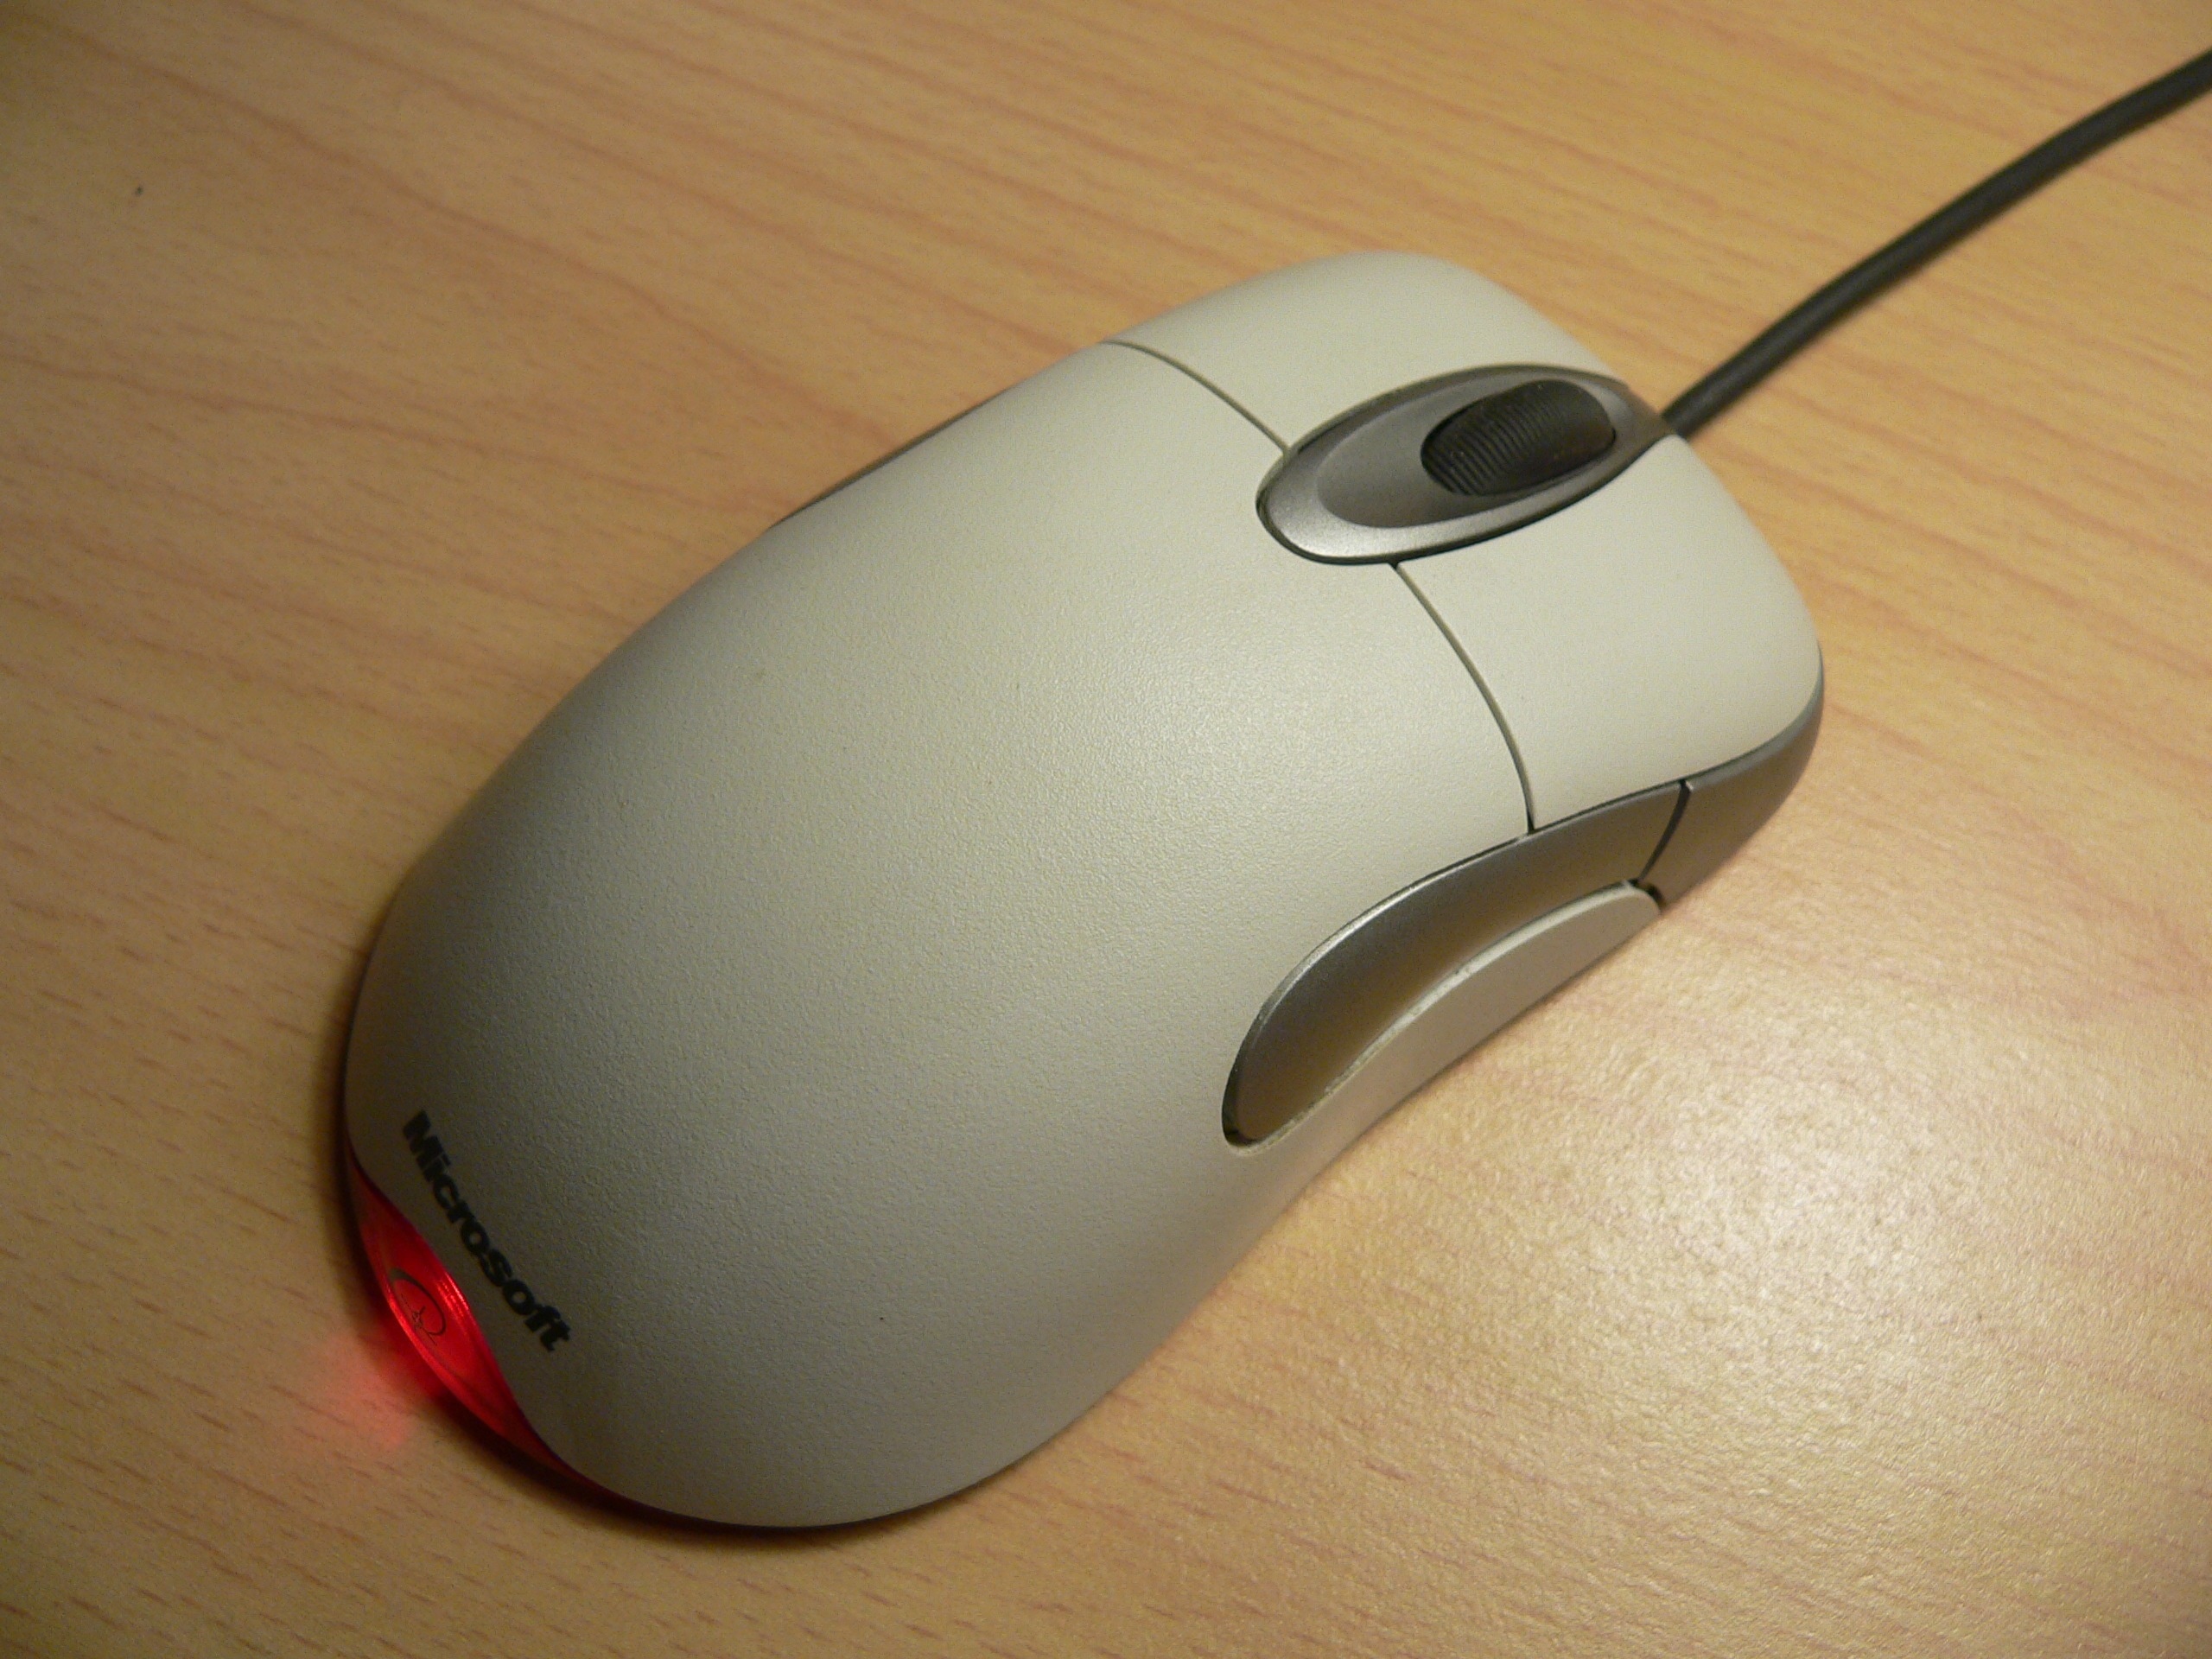 white and gray microsoft mouse